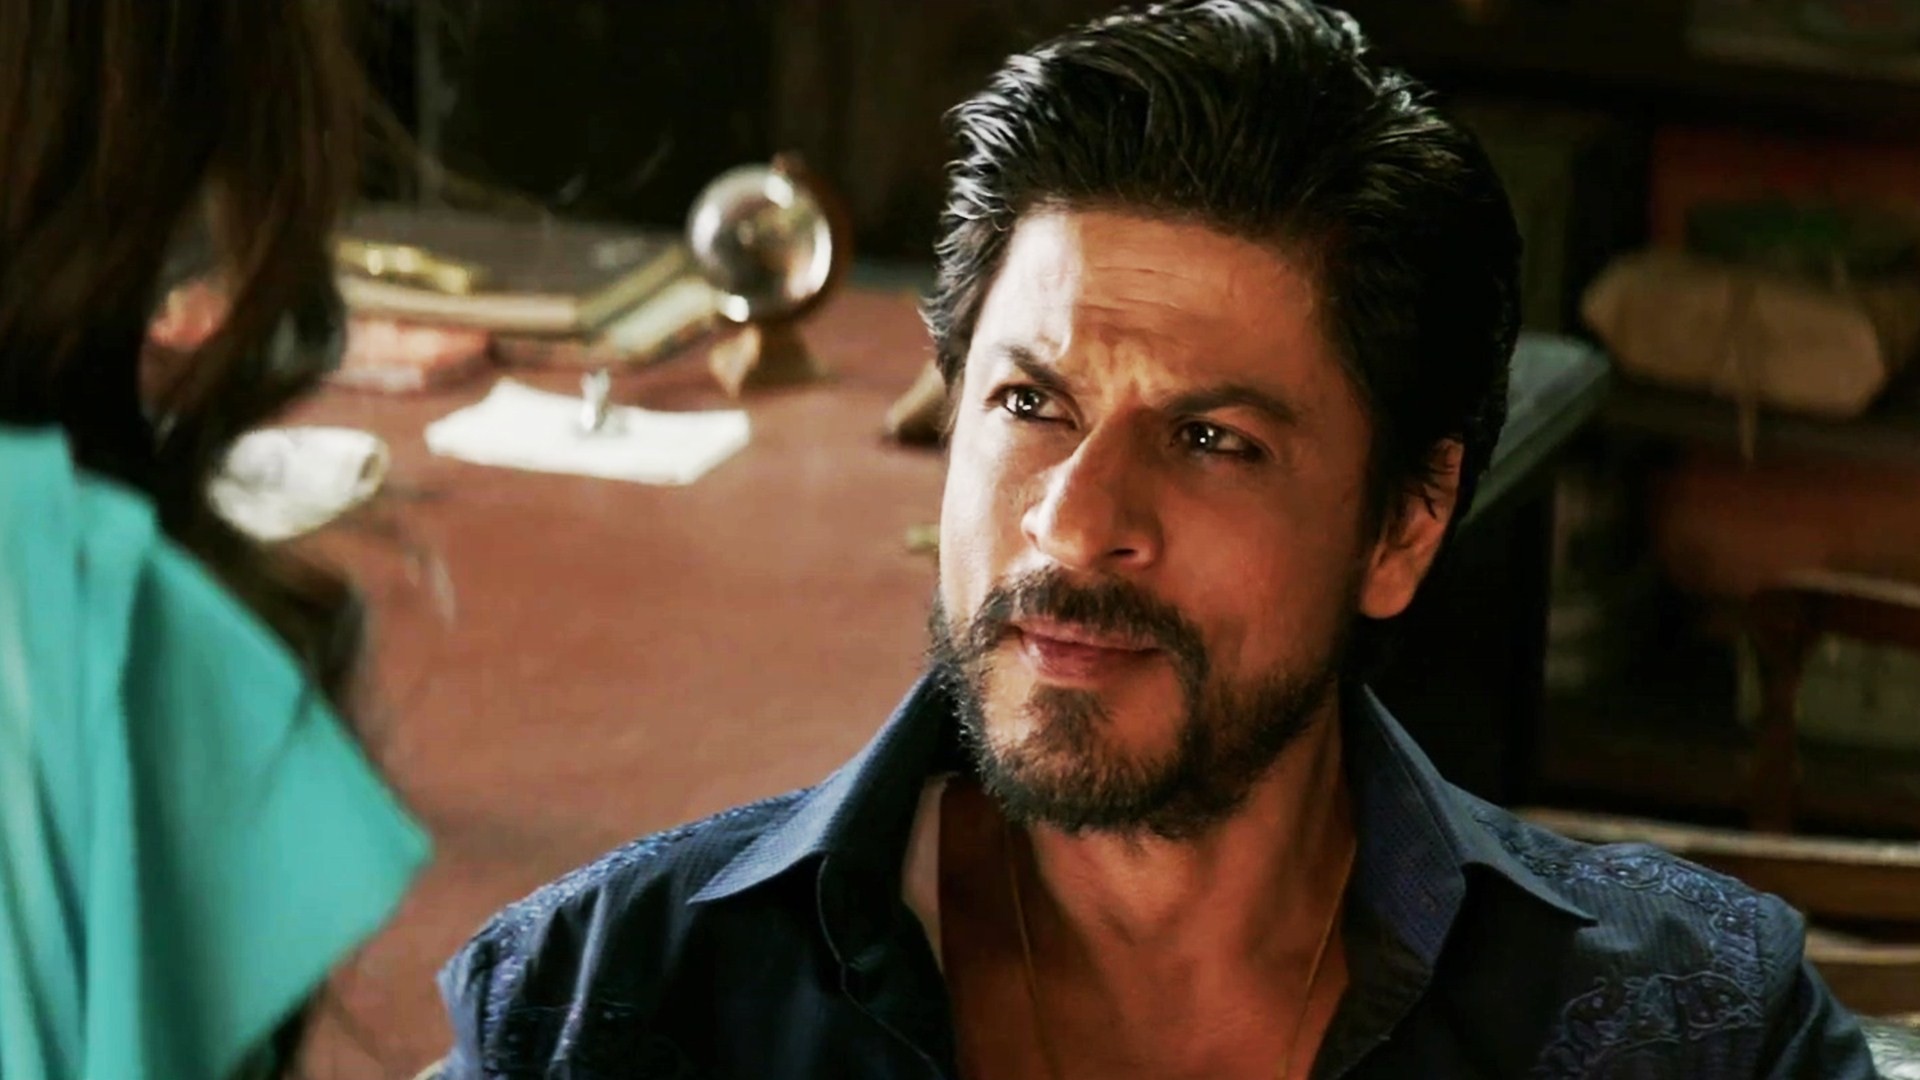 1920x1080 Raees Movie Images, Pictures And HD Wallpapers | Shahrukh Khan Looks